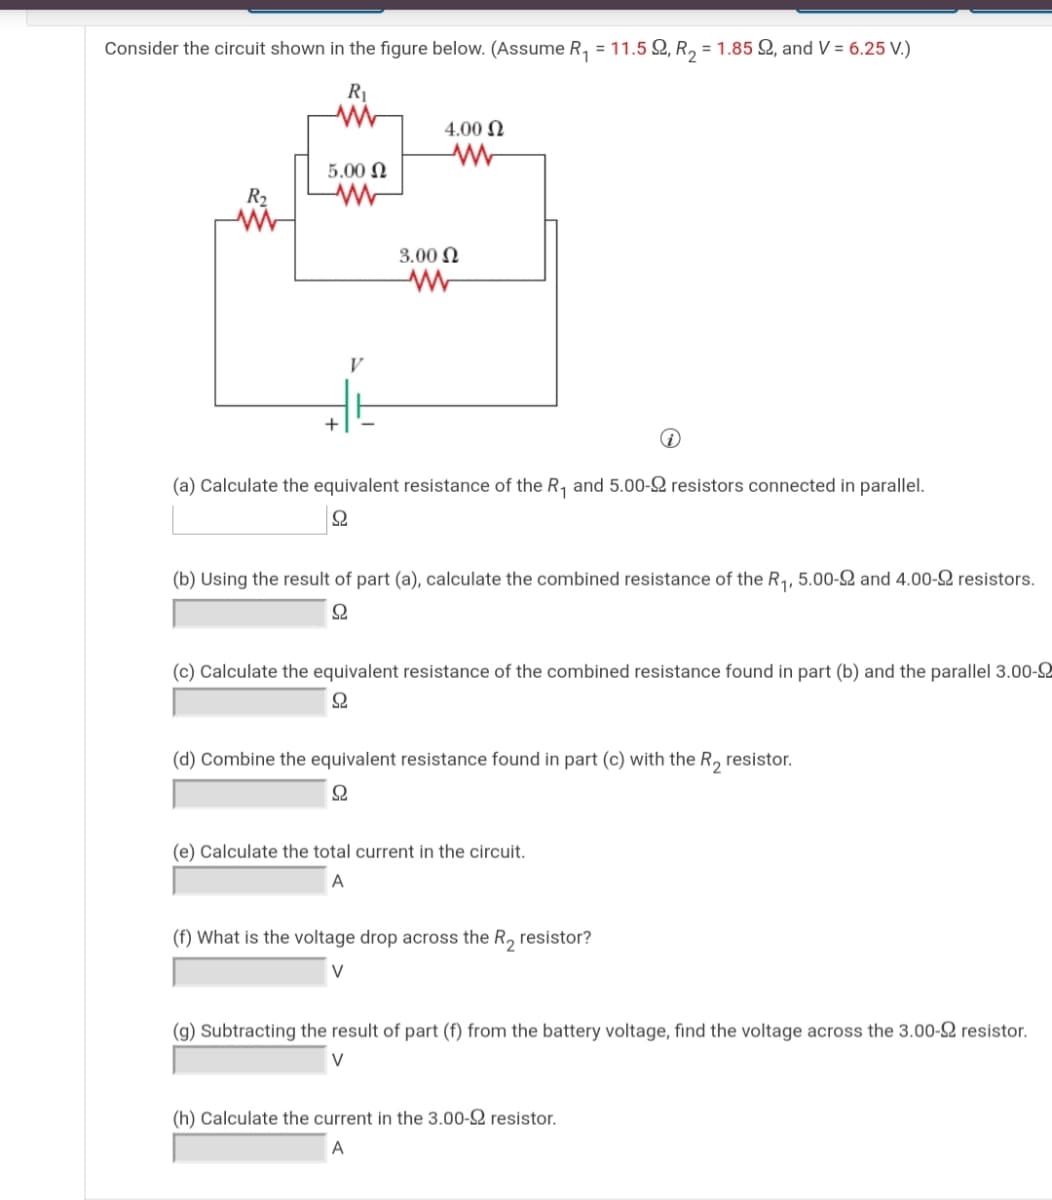 Consider the circuit shown in the figure below. (Assume R, = 11.5 Q, R, = 1.85 Q, and V = 6.25 V.)
R
4.00 N
5.00 N
R2
3.00 N
(a) Calculate the equivalent resistance of the R, and 5.00-S resistors connected in parallel.
(b) Using the result of part (a), calculate the combined resistance of the R1, 5.00-SQ and 4.00-2 resistors.
Ω
(c) Calculate the equivalent resistance of the combined resistance found in part (b) and the parallel 3.00-
(d) Combine the equivalent resistance found in part (c) with the R, resistor.
Ω
(e) Calculate the total current in the circuit.
A
(f) What is the voltage drop across the R, resistor?
V
(g) Subtracting the result of part (f) from the battery voltage, find the voltage across the 3.00-2 resistor.
V
(h) Calculate the current in the 3.00-2 resistor.
A
